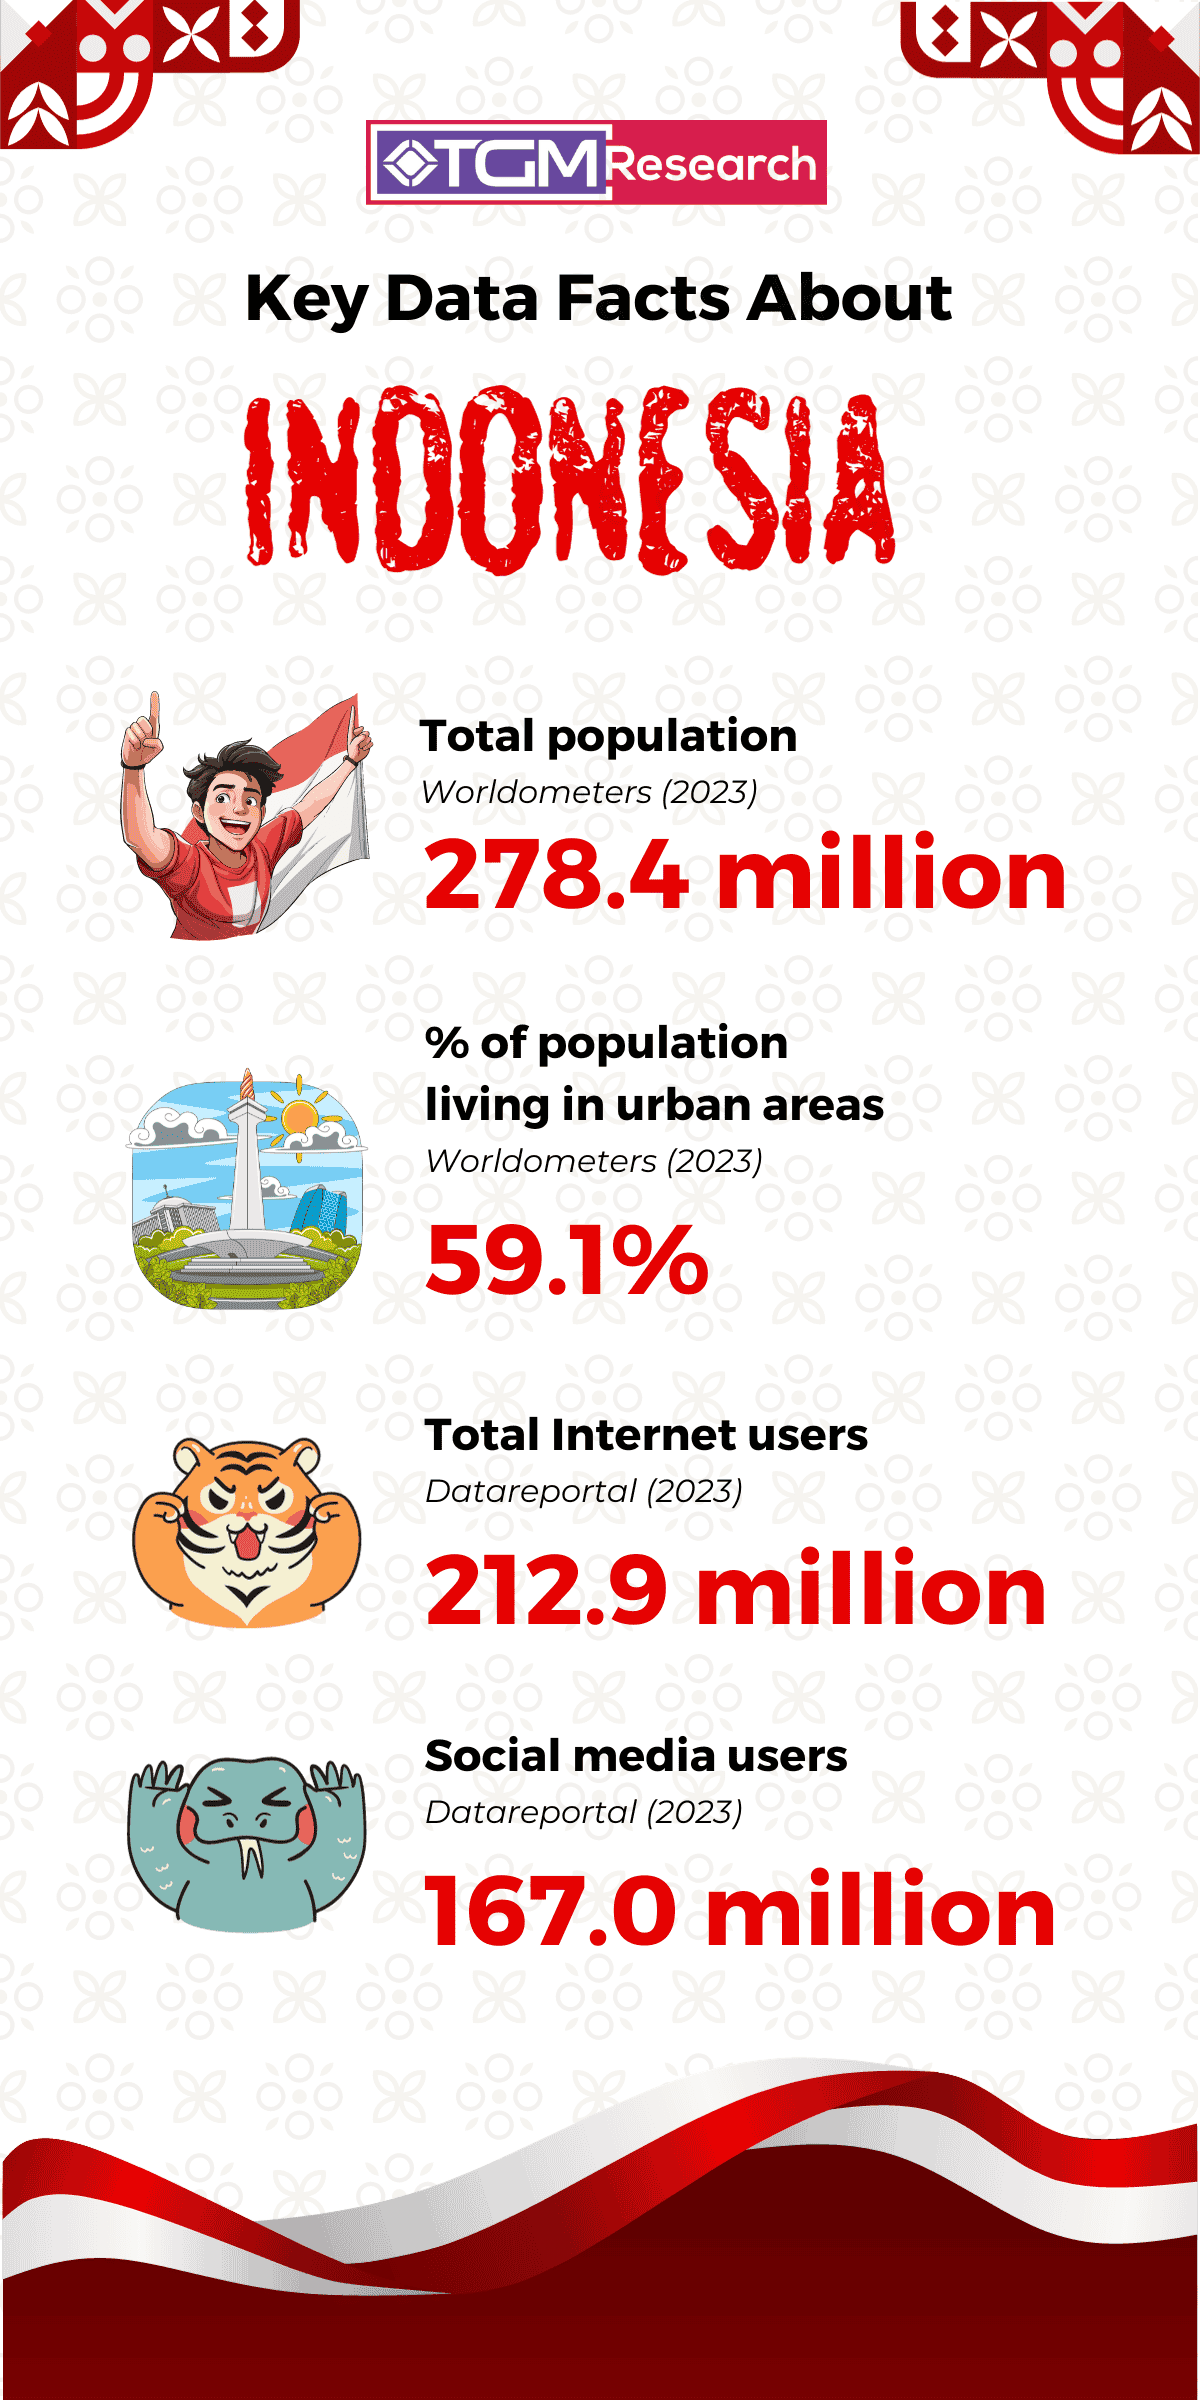 Key data facts about Indonesia